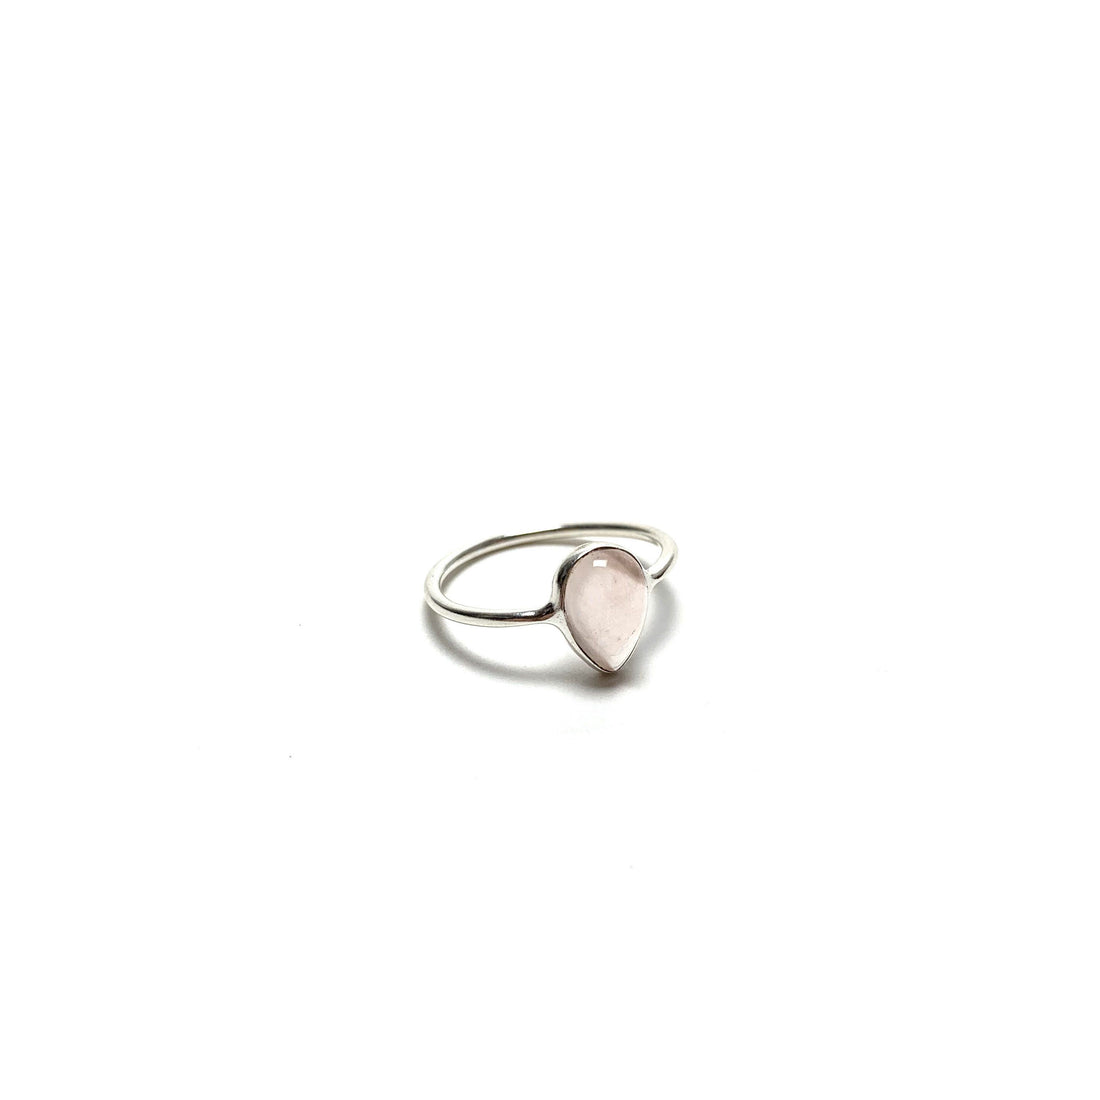 Rose Quartz Silver Ring Rings Crystals A. $18.00 Size 5 